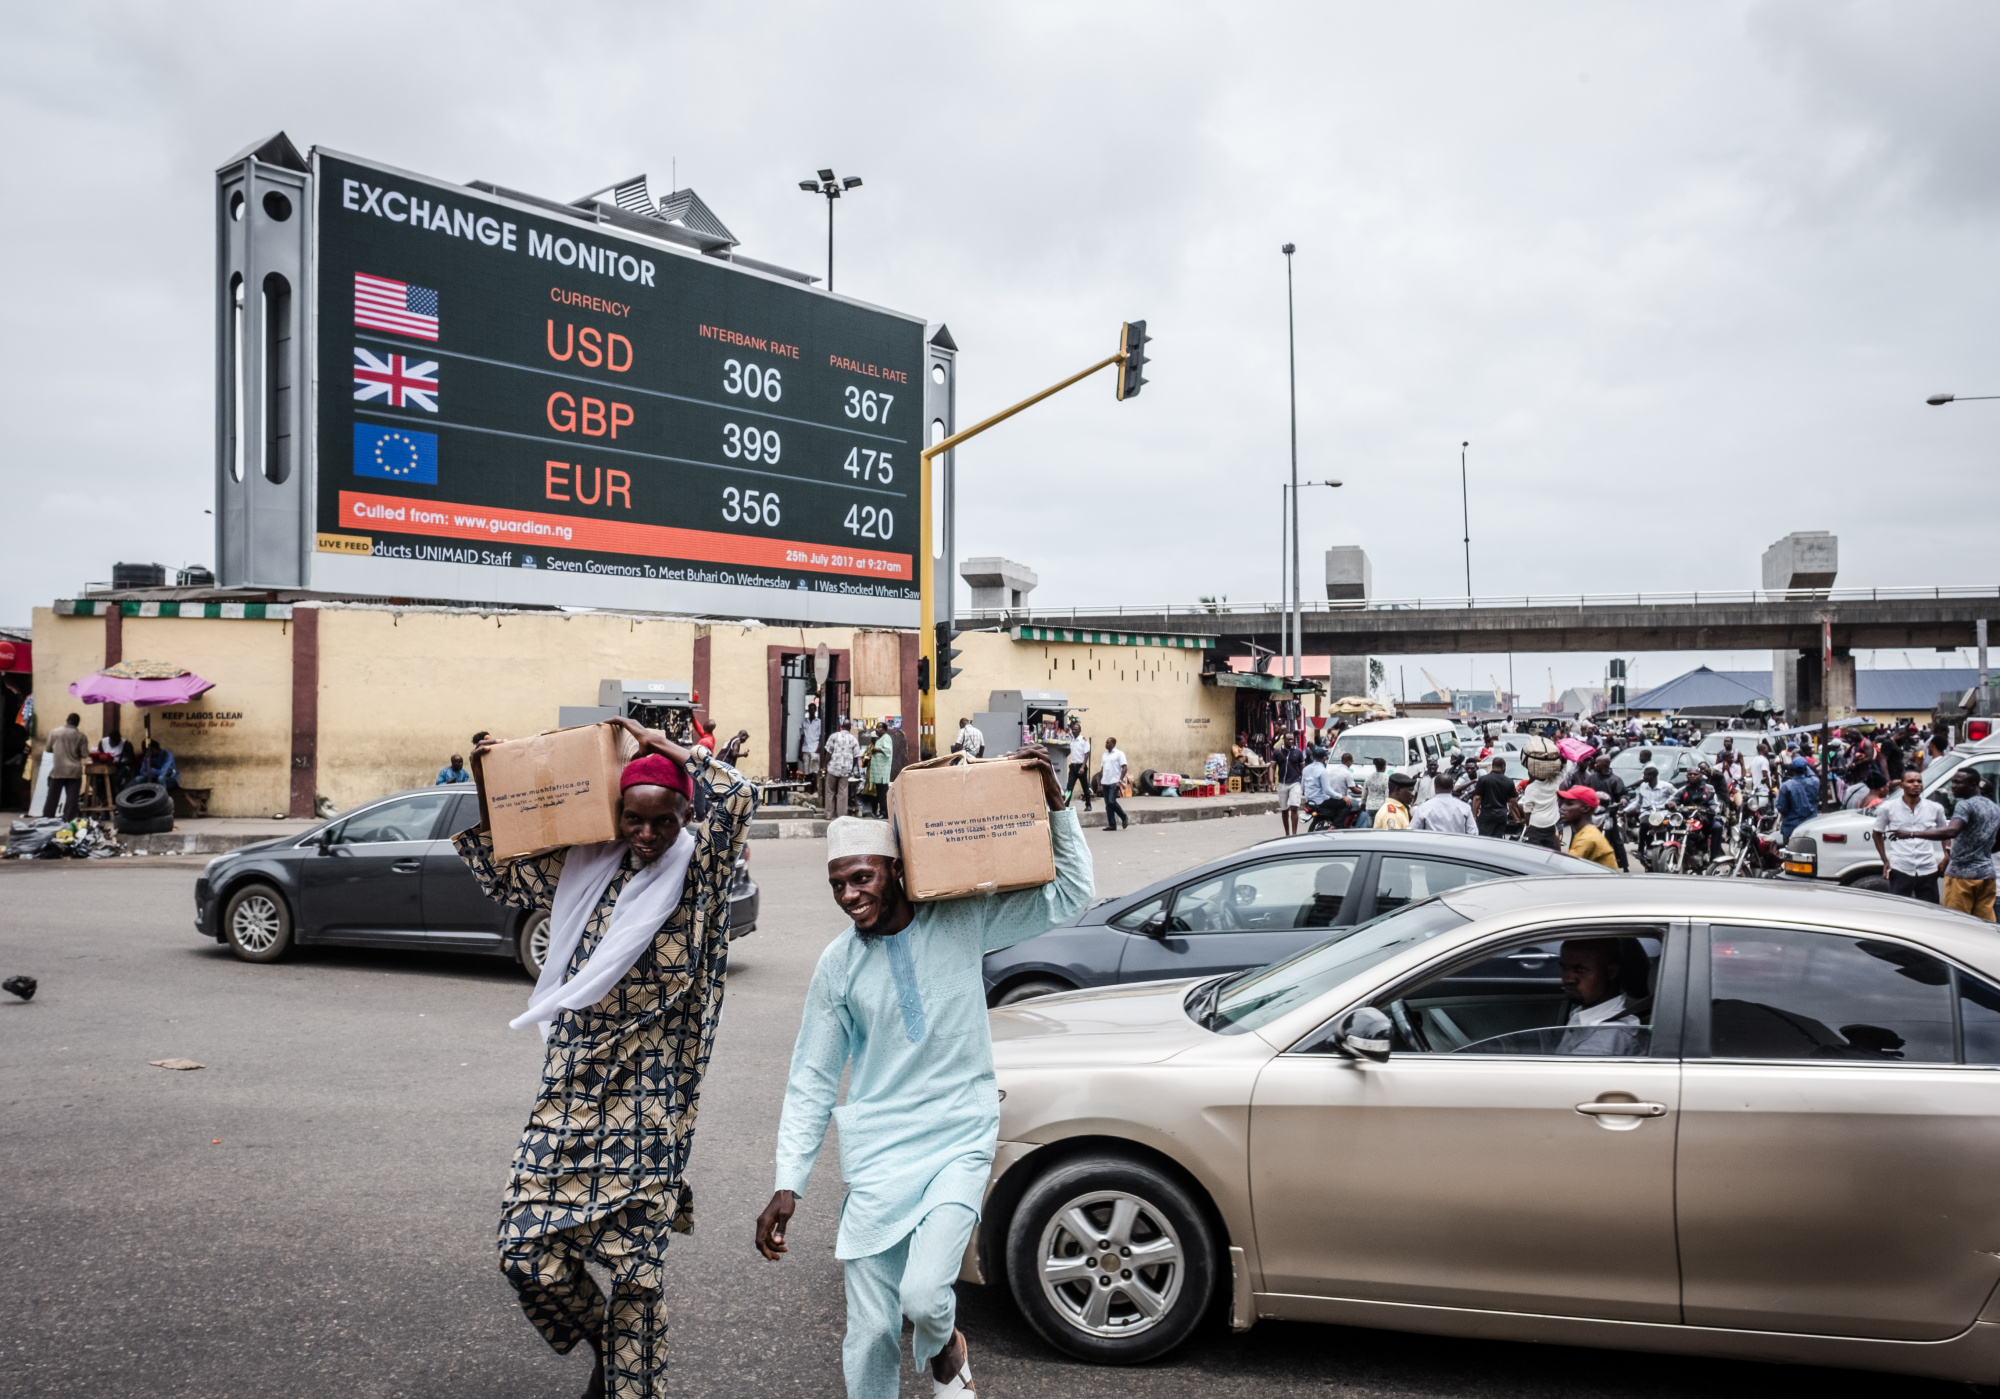 Pedestrians carry boxes of goods across a busy road near a giant advertising screen showing US dollar, British pound and euro foreign currency exchange rates in Lagos, Nigeria.